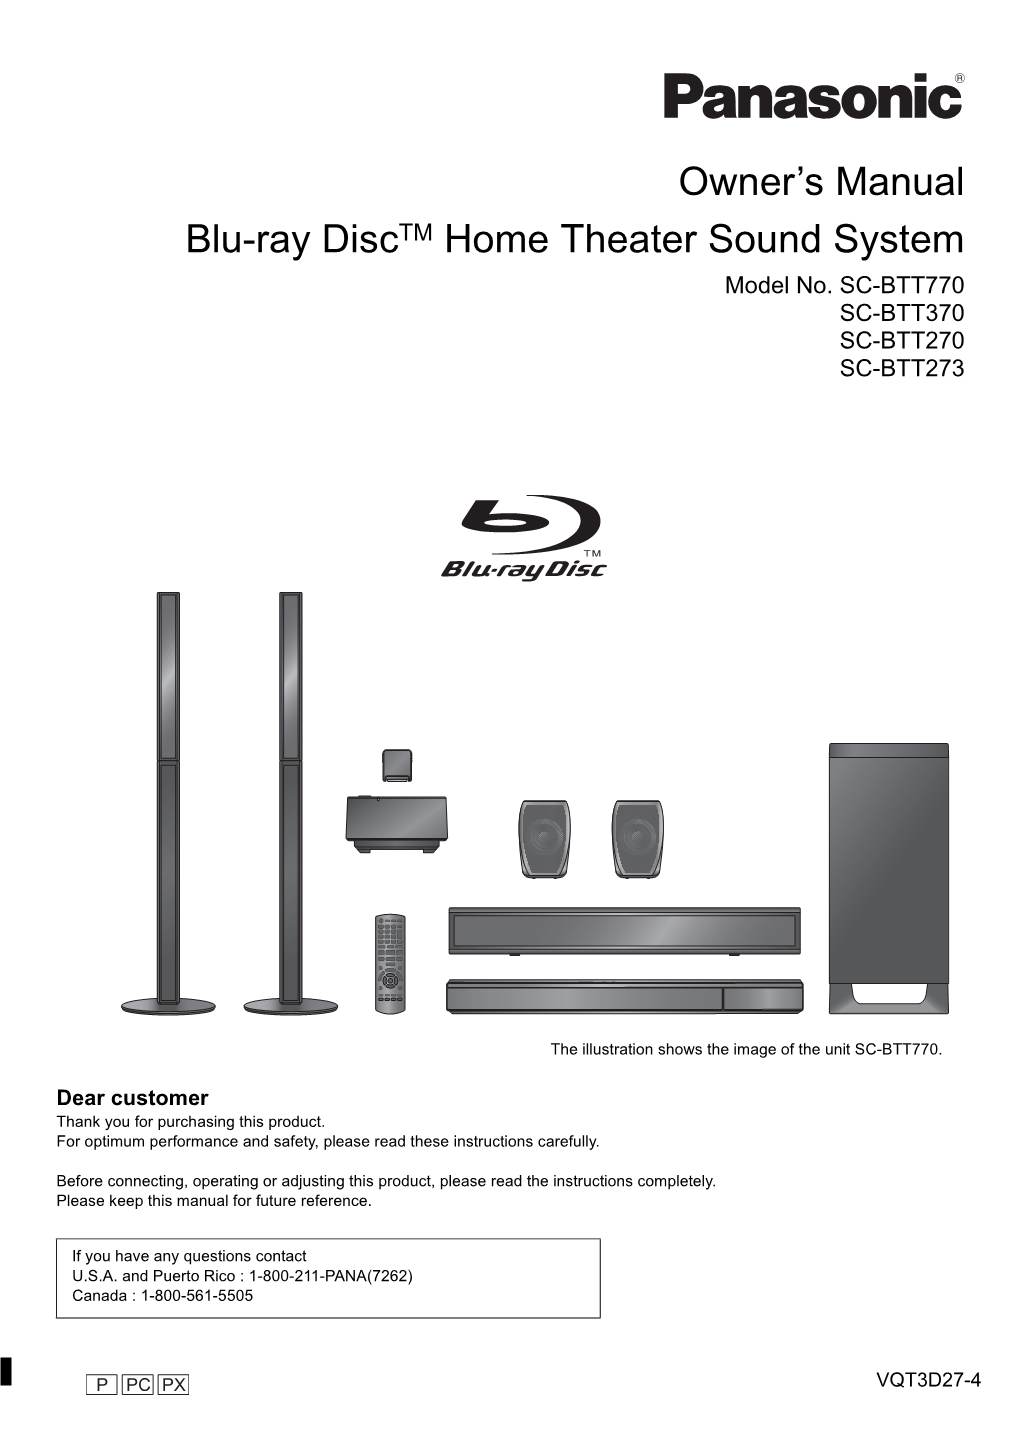 Owner's Manual Blu-Ray Disctm Home Theater Sound System